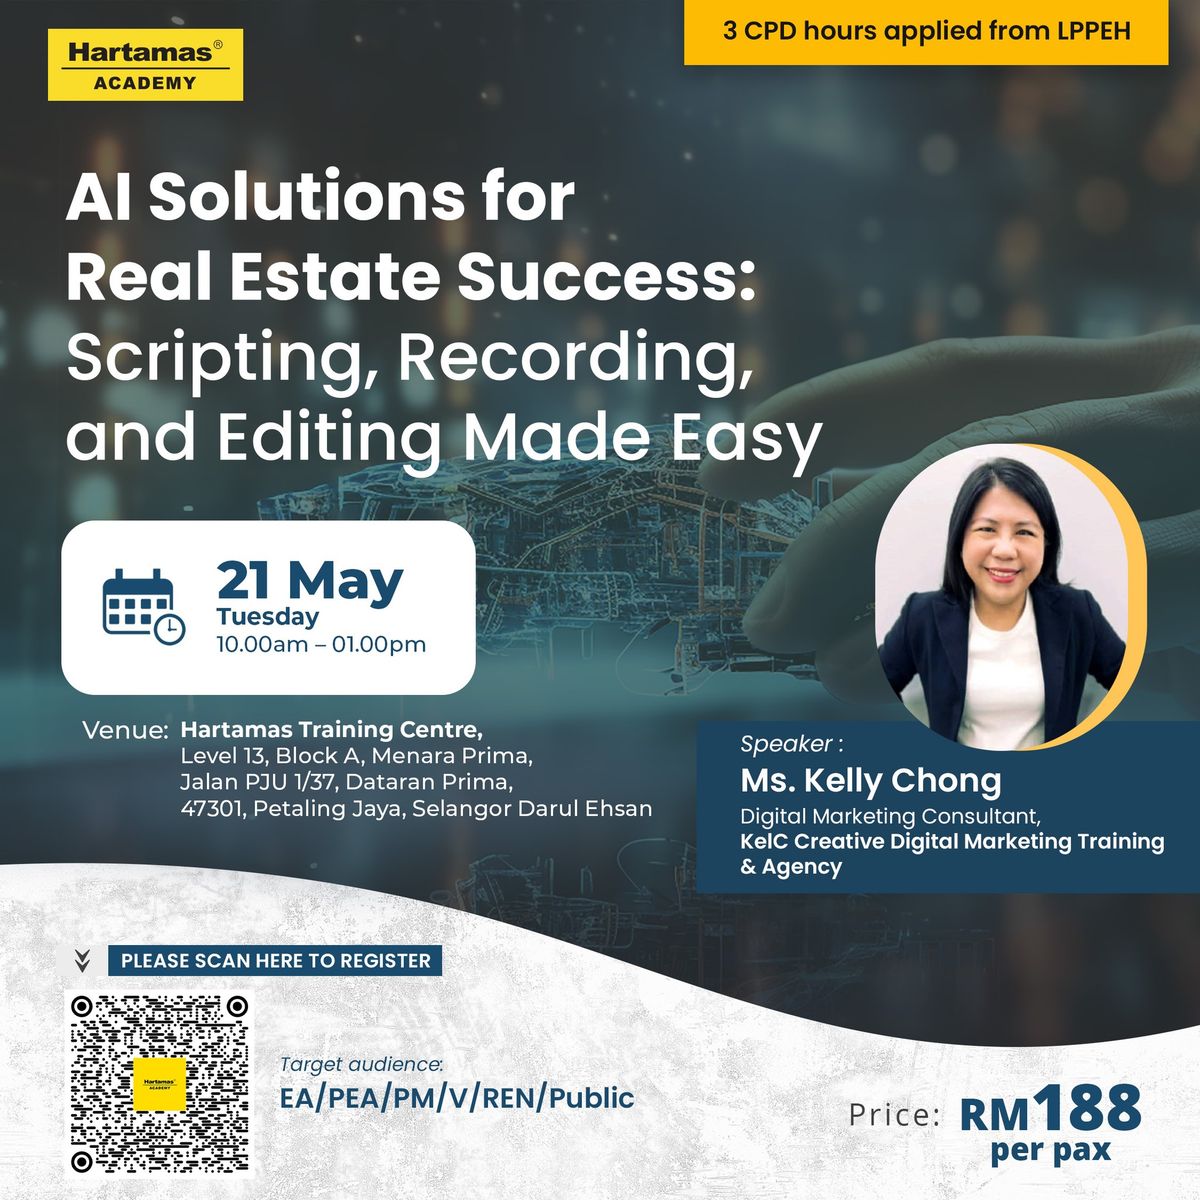 AI Solutions for Real Estate Success: Scripting, Recording, and Editing Made Easy \ud83e\udd16